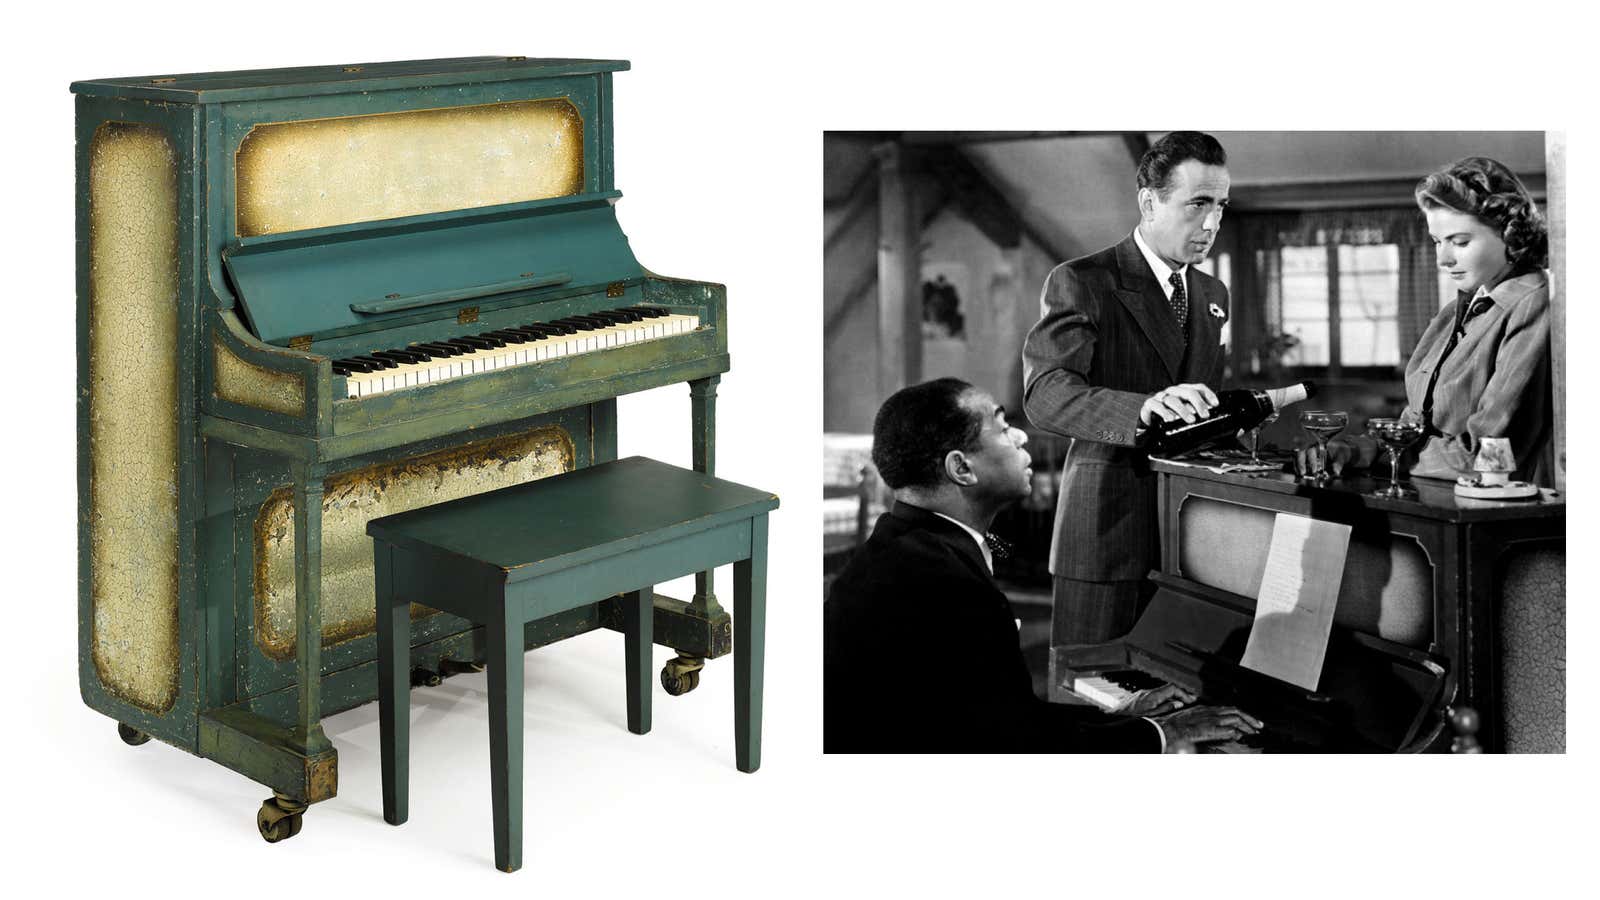 Sotheby’s expects to fetch up to $1.2 million for Casablanca piano